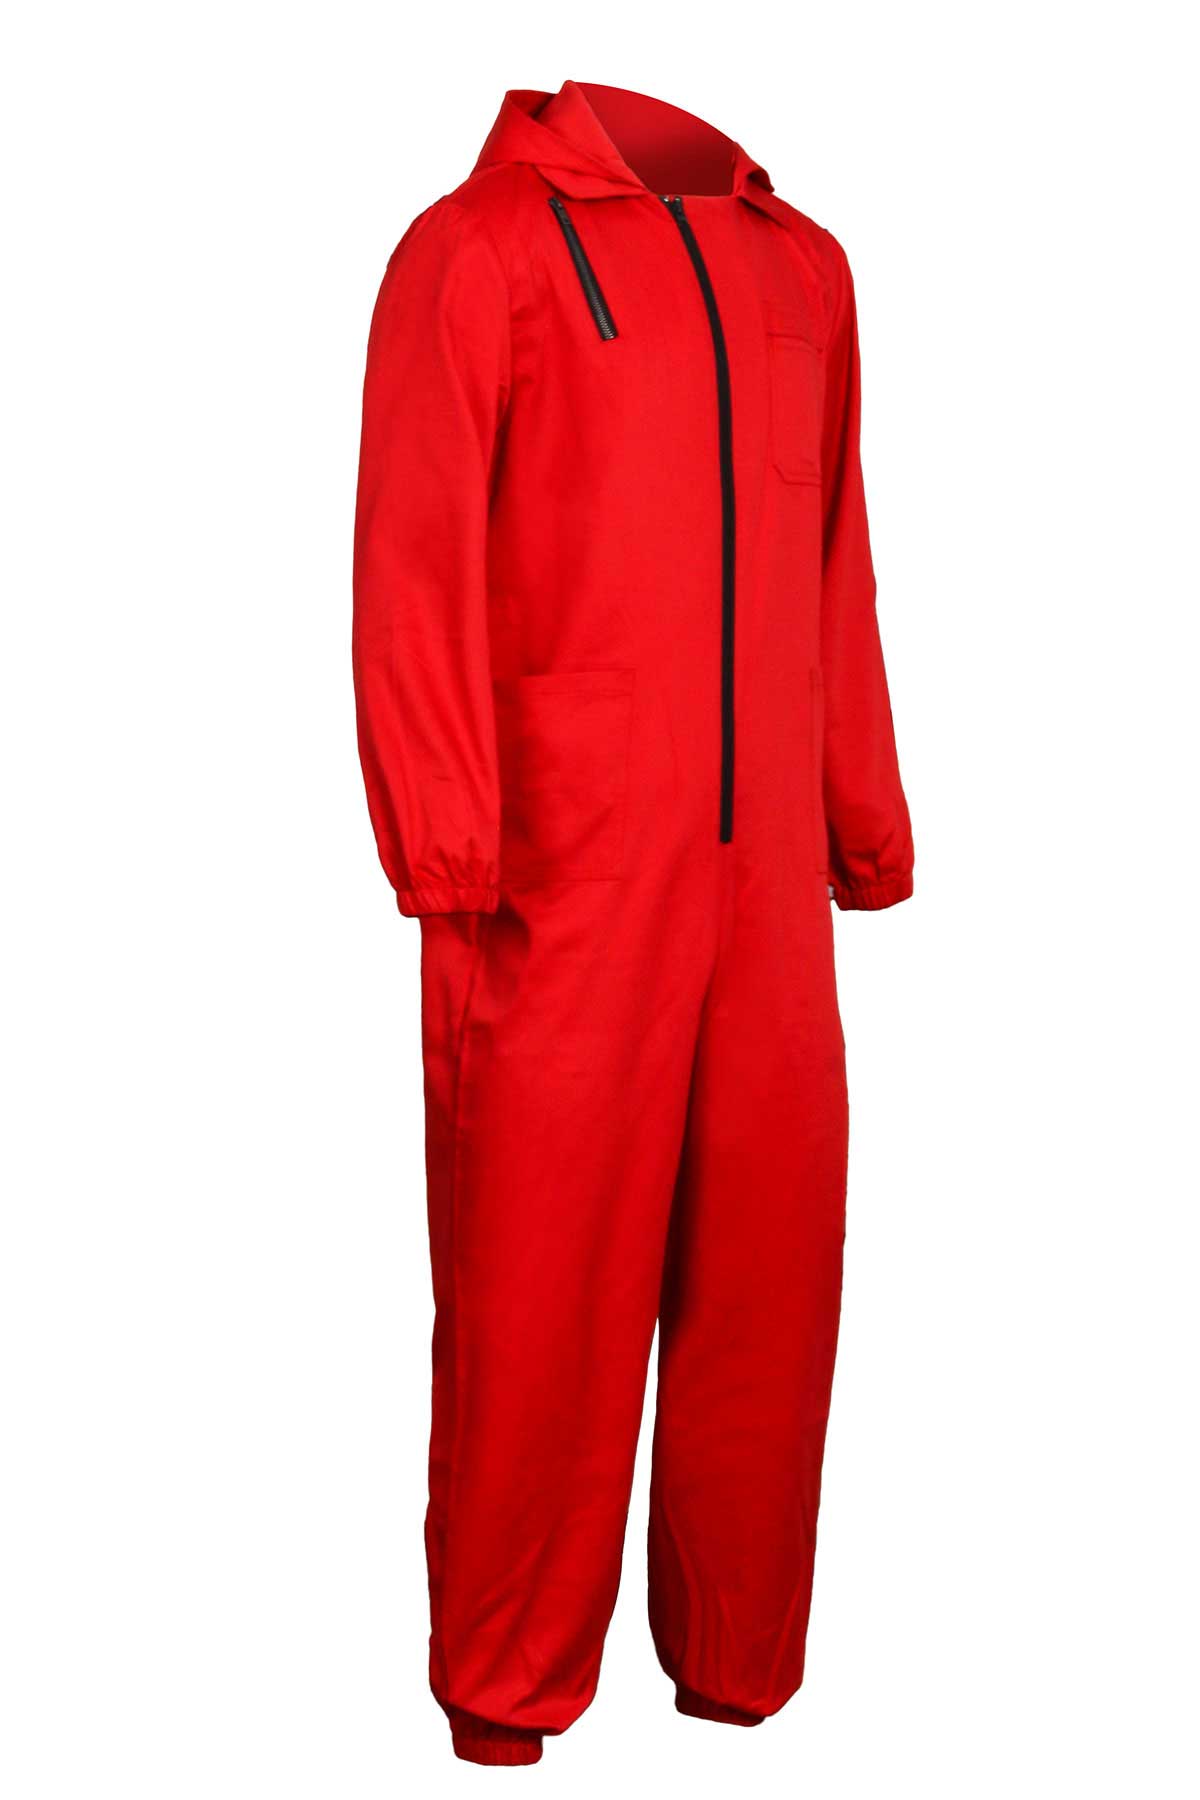 Money Heist jumpsuit and party Halloween costumes and theme dinners  hollywood Squid games, Men's Fashion, Coats, Jackets and Outerwear on  Carousell